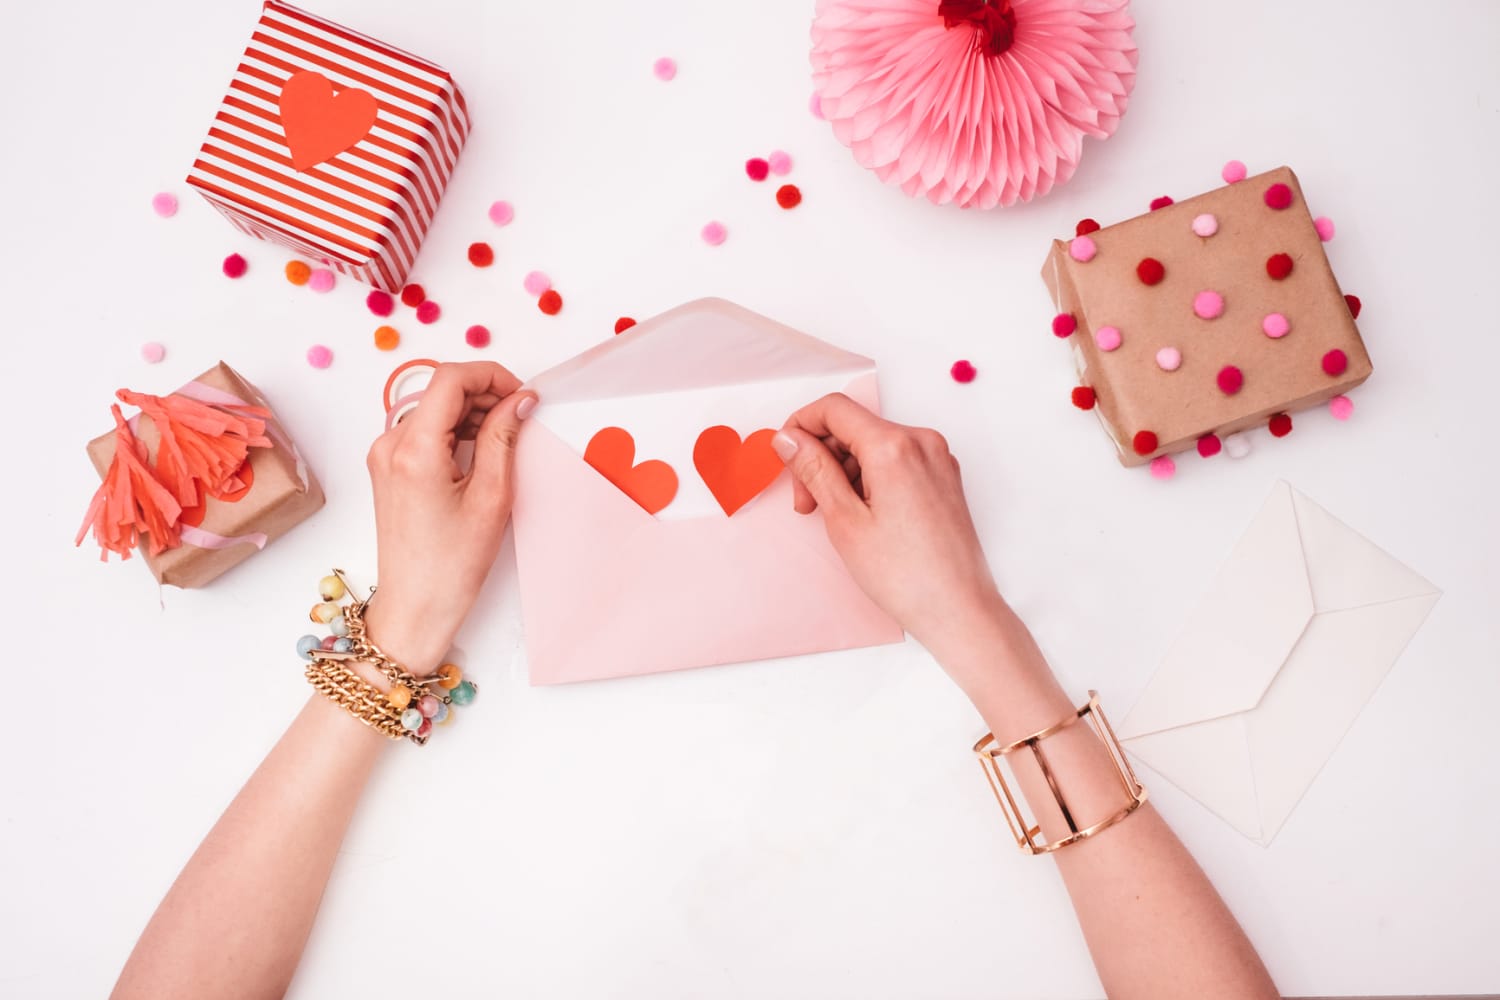 40 Cheap Valentine's Day Gifts - Affordable Gift Ideas Under $50